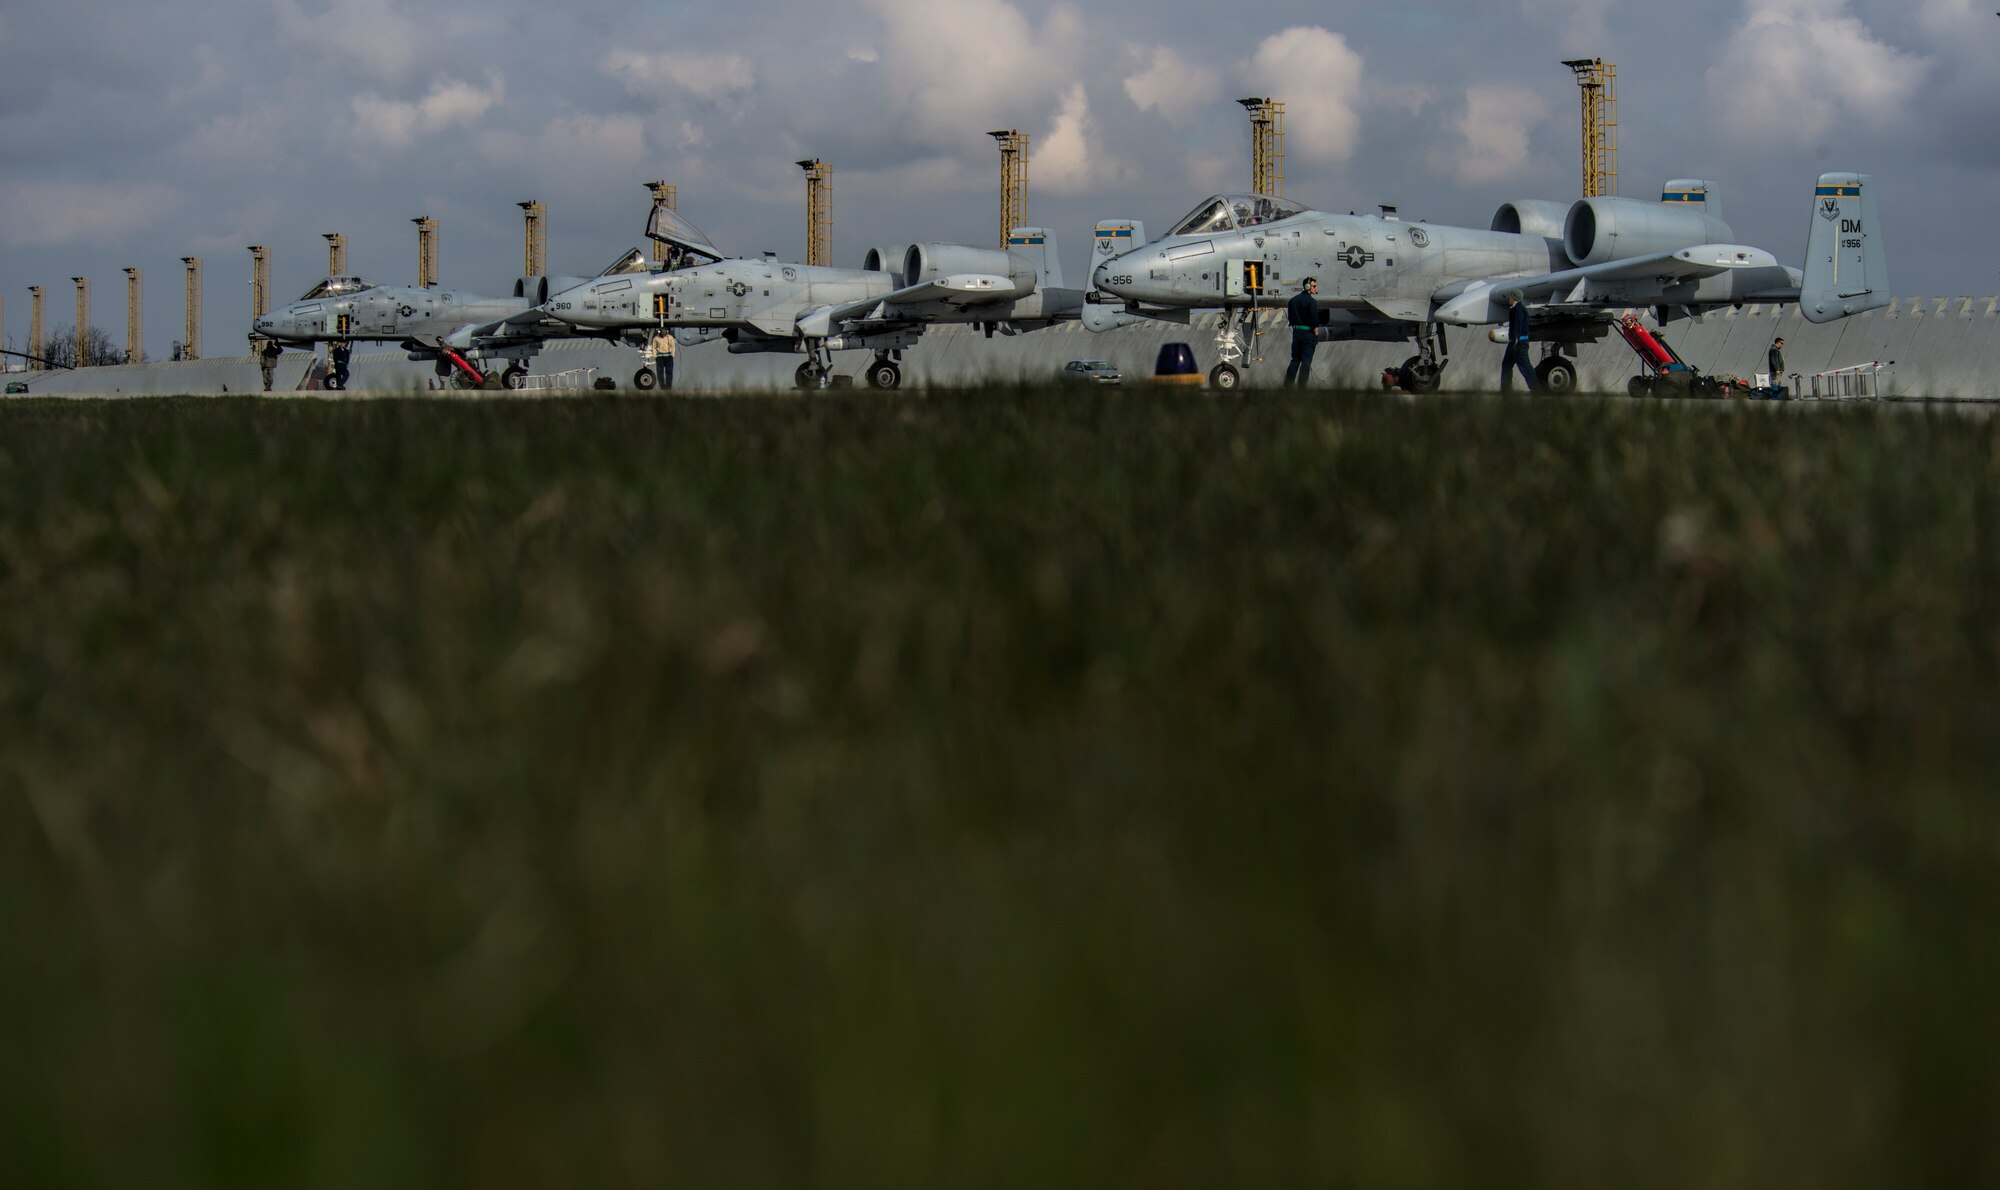 Airmen assigned to the 354th Expeditionary Fighter Squadron prep 4 U.S. Air Force A-10 Thunderbolt II attack aircraft for flight during a theater security package deployment to Namest Air Base, Czech Republic, April 9, 2015. More than 50 Airmen and support equipment from the 355th Fighter Wing at Davis-Monthan Air Force Base, Ariz., and the 52nd Fighter Wing at Spangdahlem Air Base, Germany, will support this deployment. (U.S. Air Force photo by Staff Sgt. Christopher Ruano/Released)